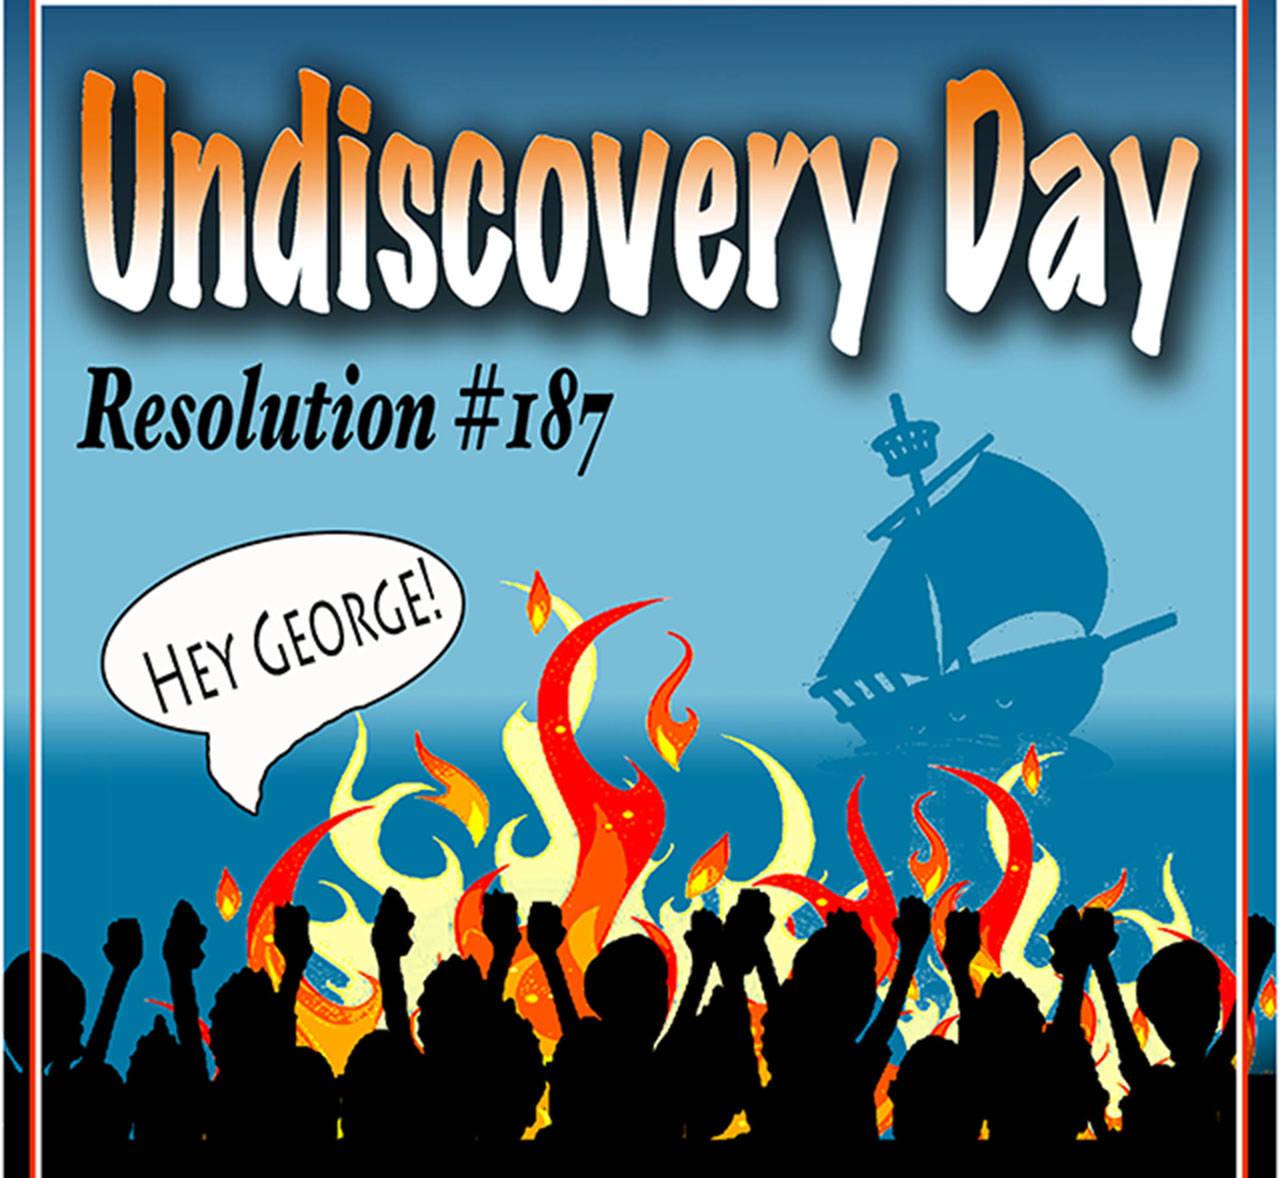 Local artist Judy Horne created this poster for the April 29 rebirth of “Undiscovery Day” in Ocean Shores.